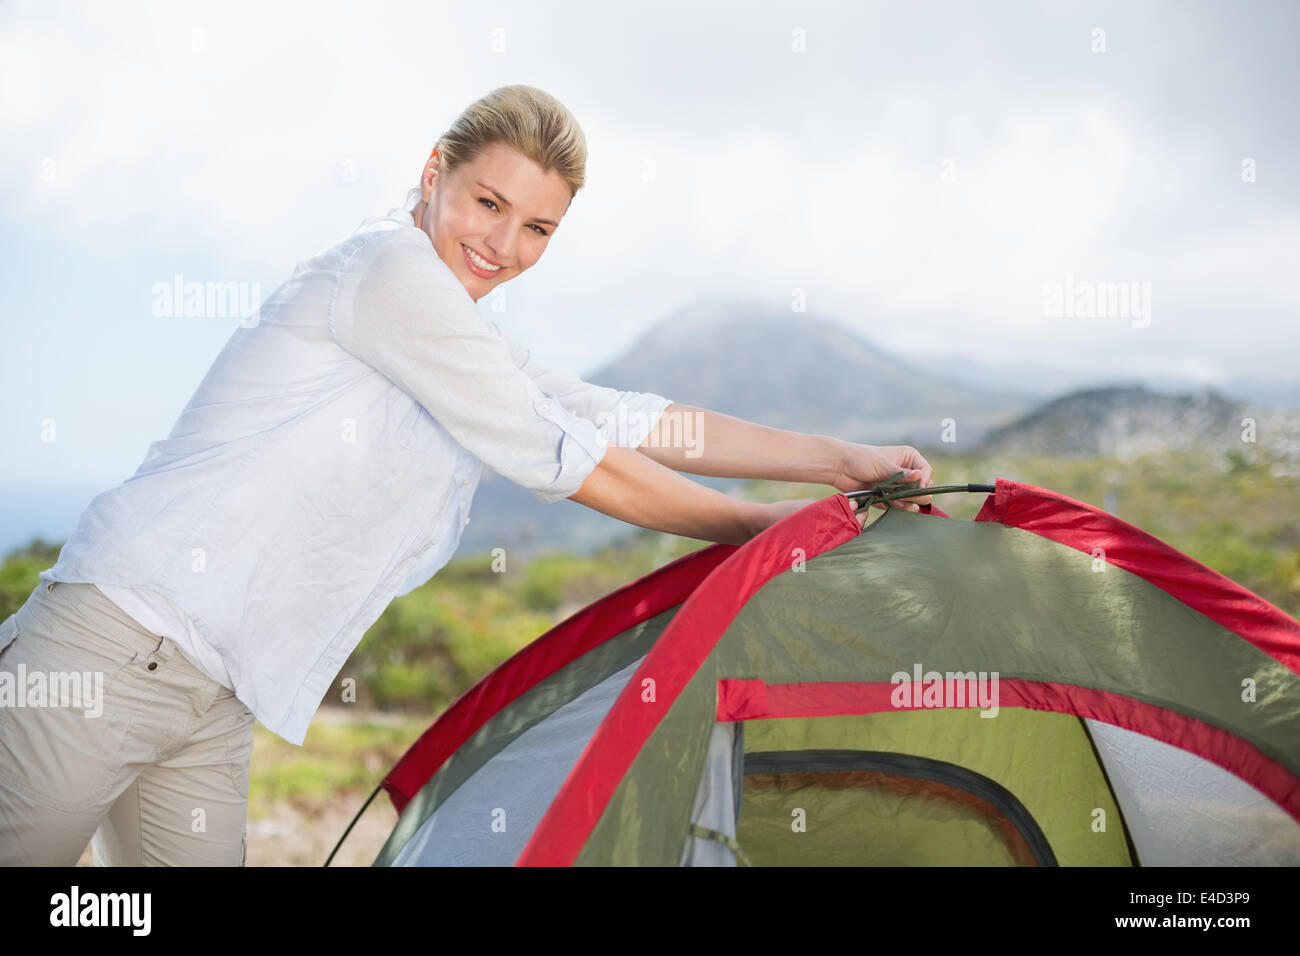 Attractive blonde setting up her tent Stock Photo